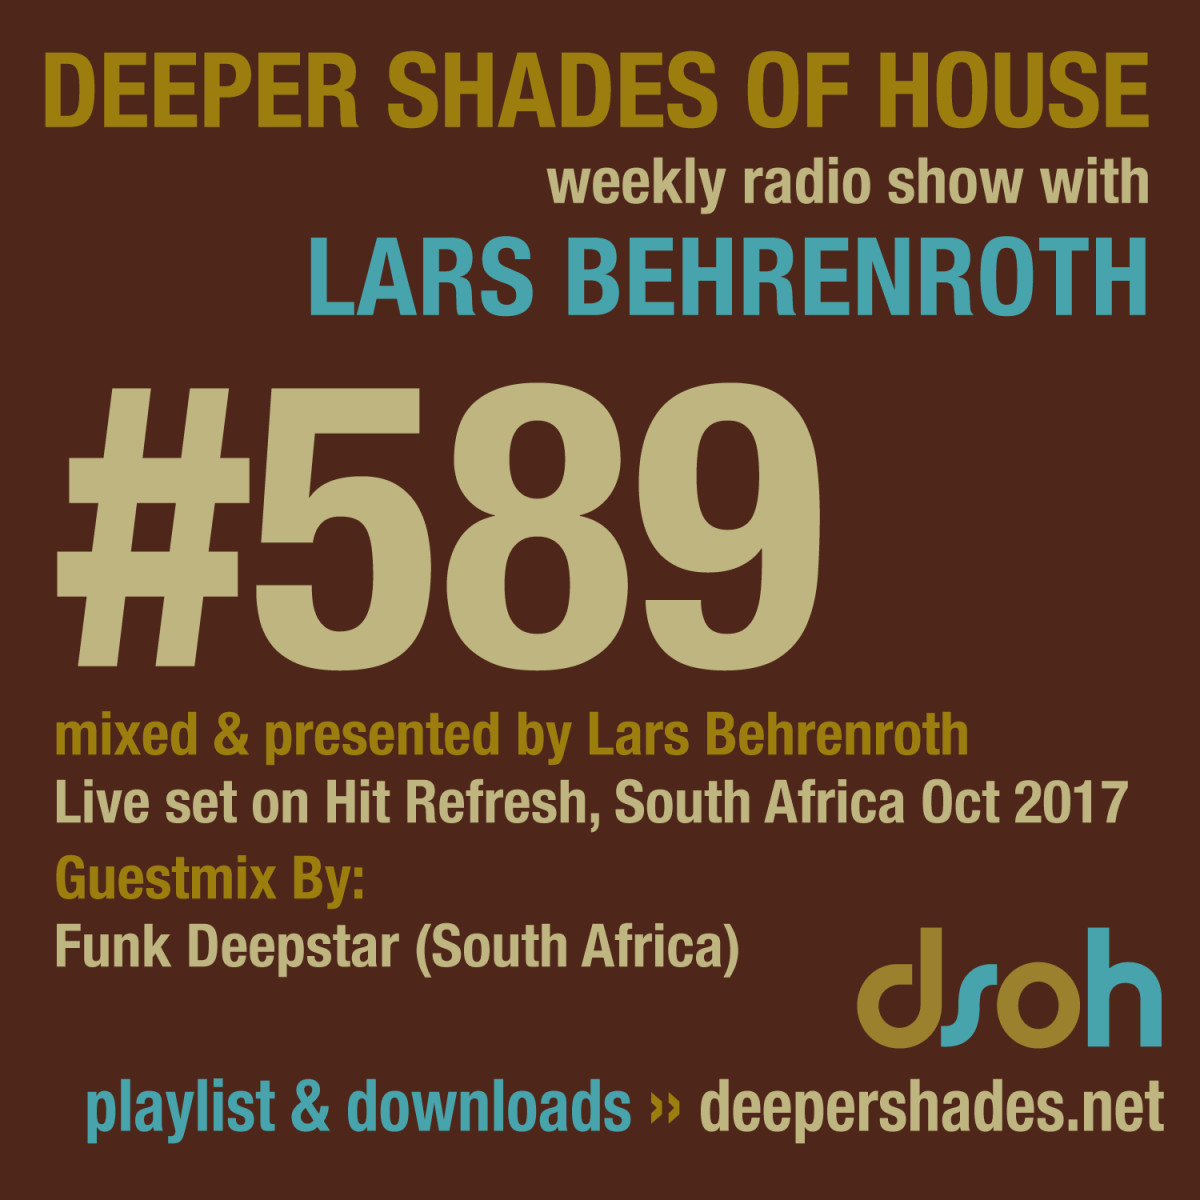 #nowplaying on radio.deepershades.net : Lars Behrenroth w/ excl. guest mix by FUNK DEEPSTAR - DSOH #589 Deeper Shades Of House #deephouse #livestream #dsoh #housemusic